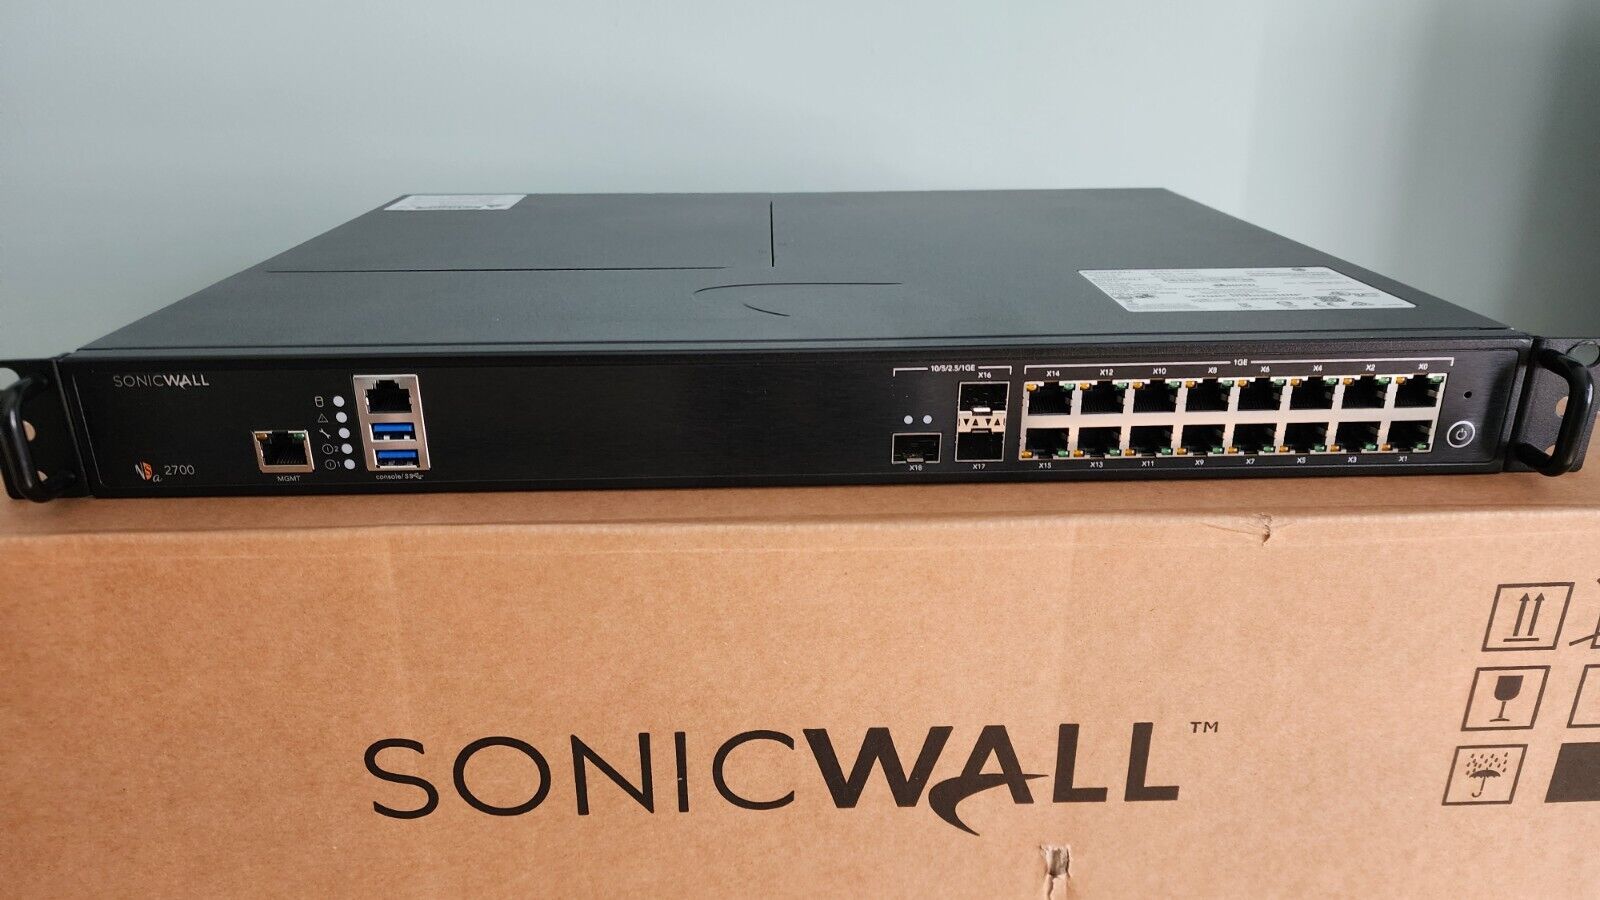 SonicWall NSa 2700 Rack-Mount Firewall Network Security Router TRANSFER READY